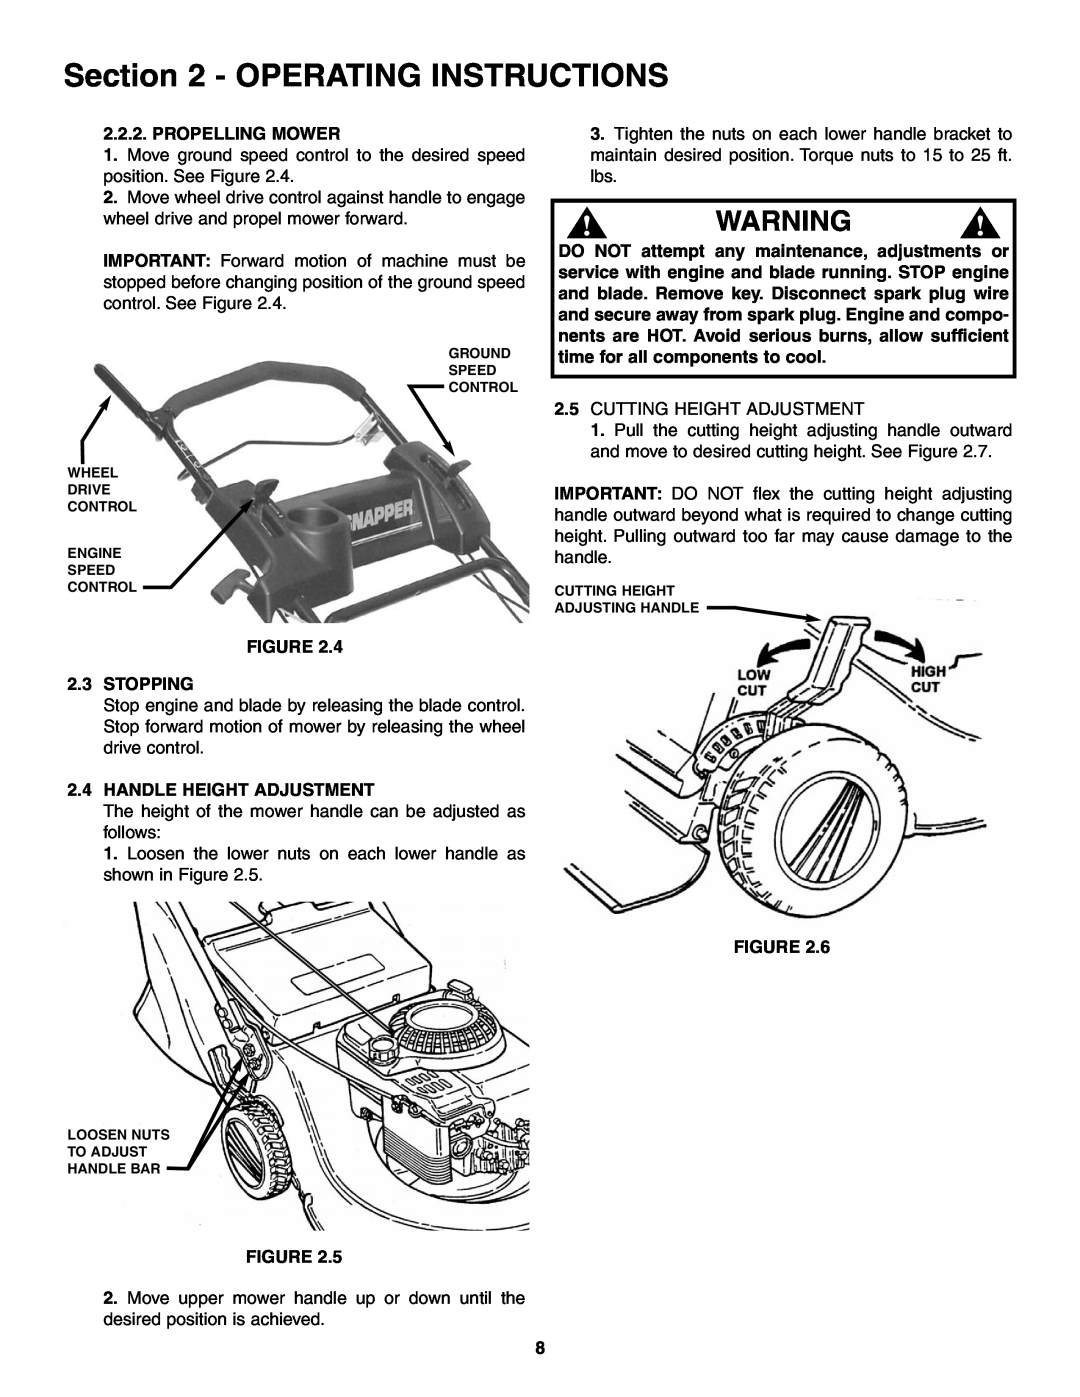 Snapper ELP216753BDV specifications Operating Instructions, Propelling Mower, Stopping, Handle Height Adjustment 